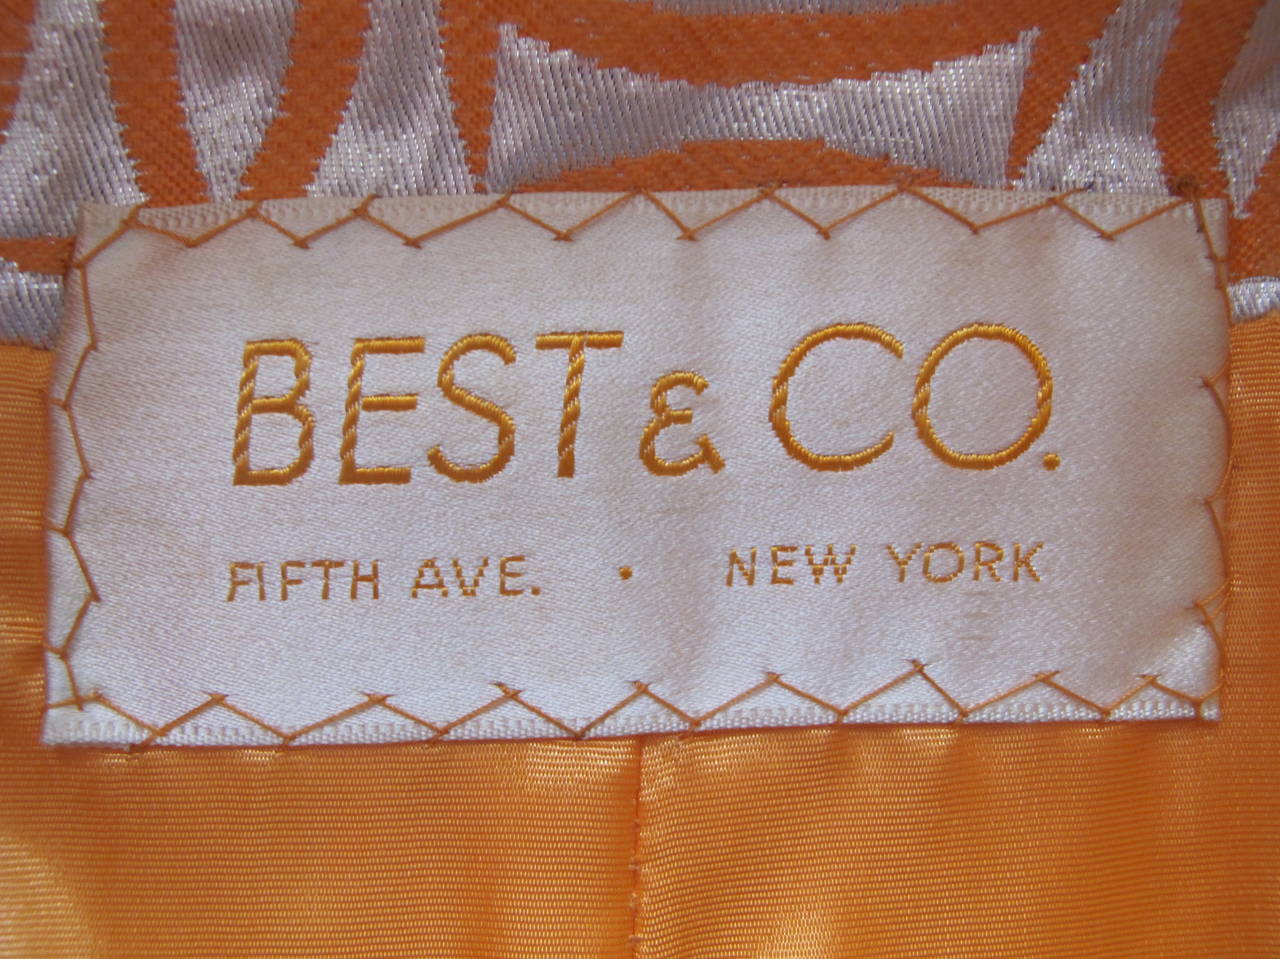 Malcolm Starr for Best & Co. Fifth Avenue, New York Coat For Sale 6